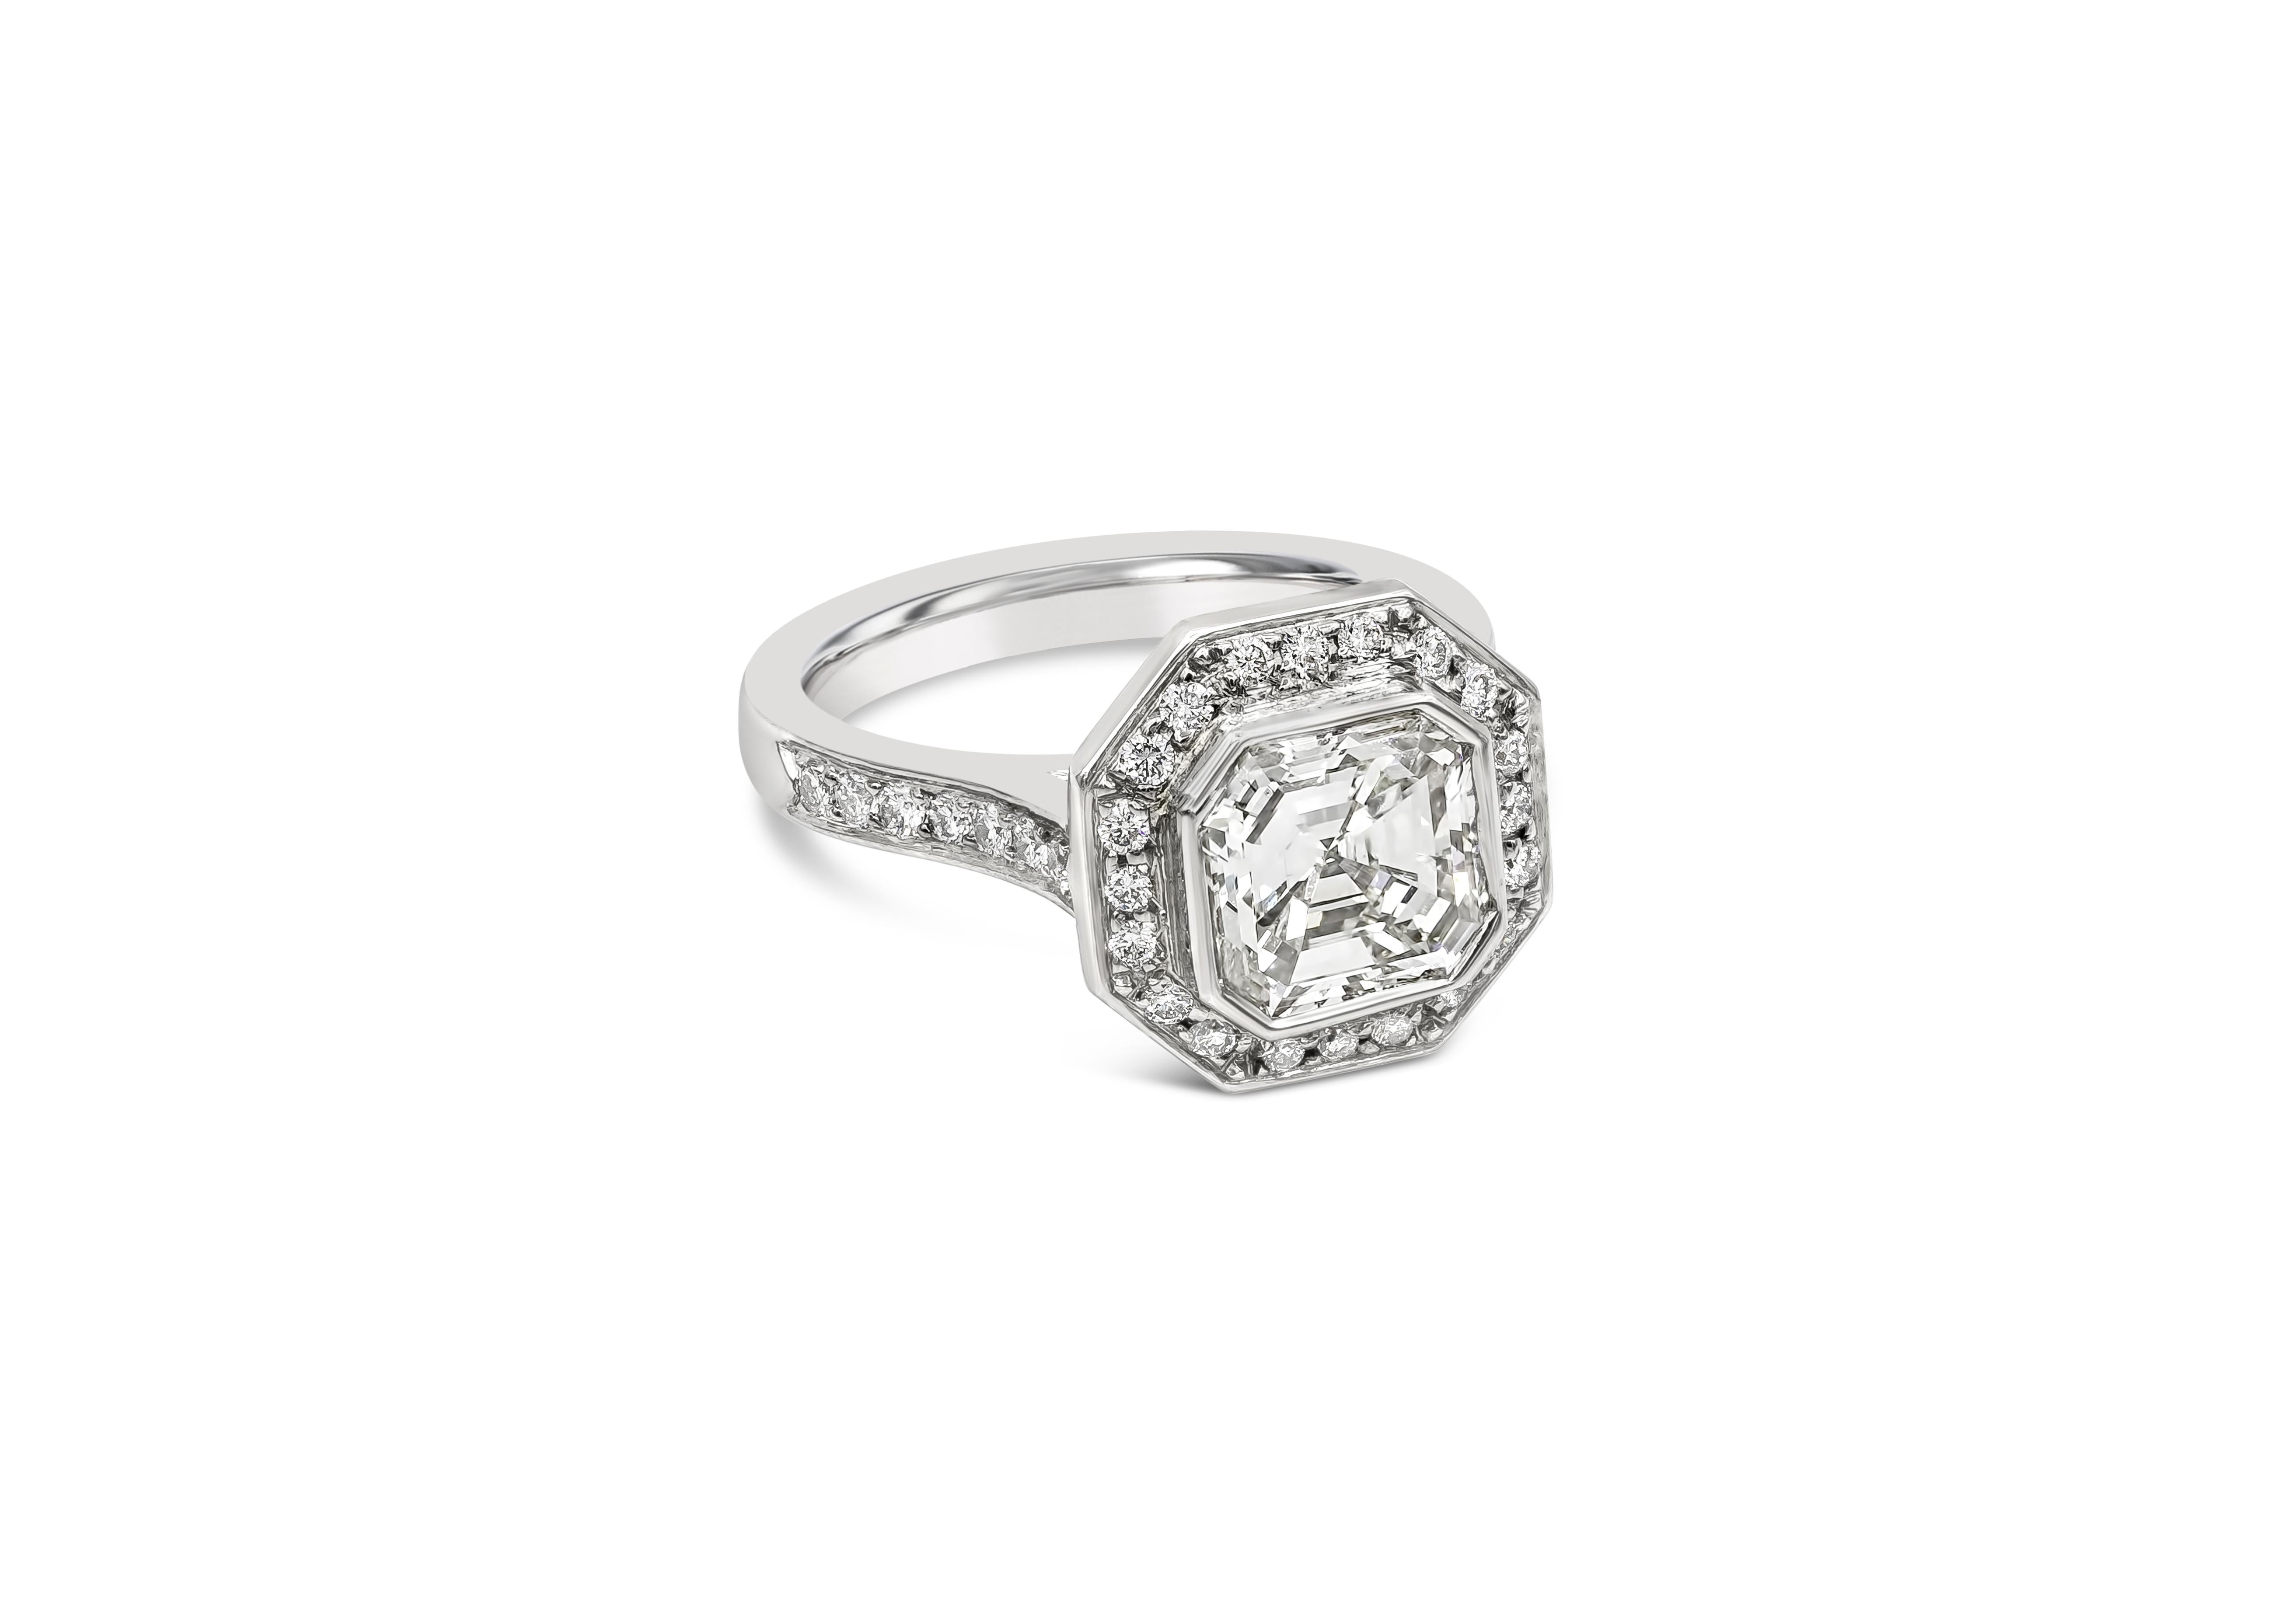 This beautiful halo engagement ring showcasing a EGL certified 2.07 carats asscher cut diamond, bezel set in a brilliant diamond halo. Set in a polished platinum band accented with brilliant round diamonds in half eternity setting. Accent diamonds